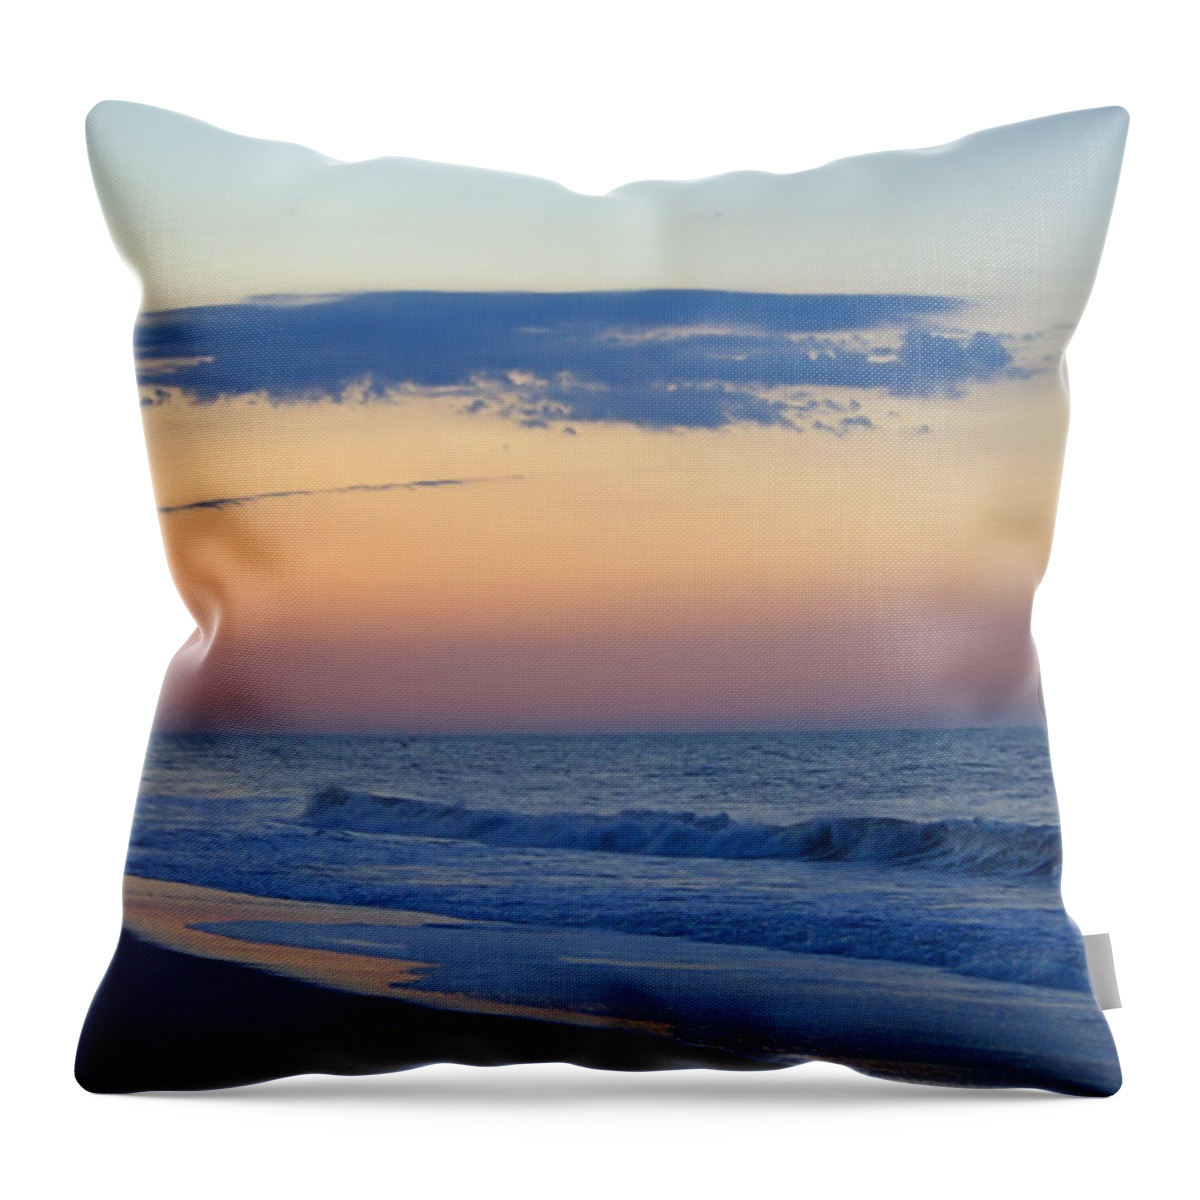 Waves Throw Pillow featuring the photograph Clouded Pre Sunrise by Newwwman